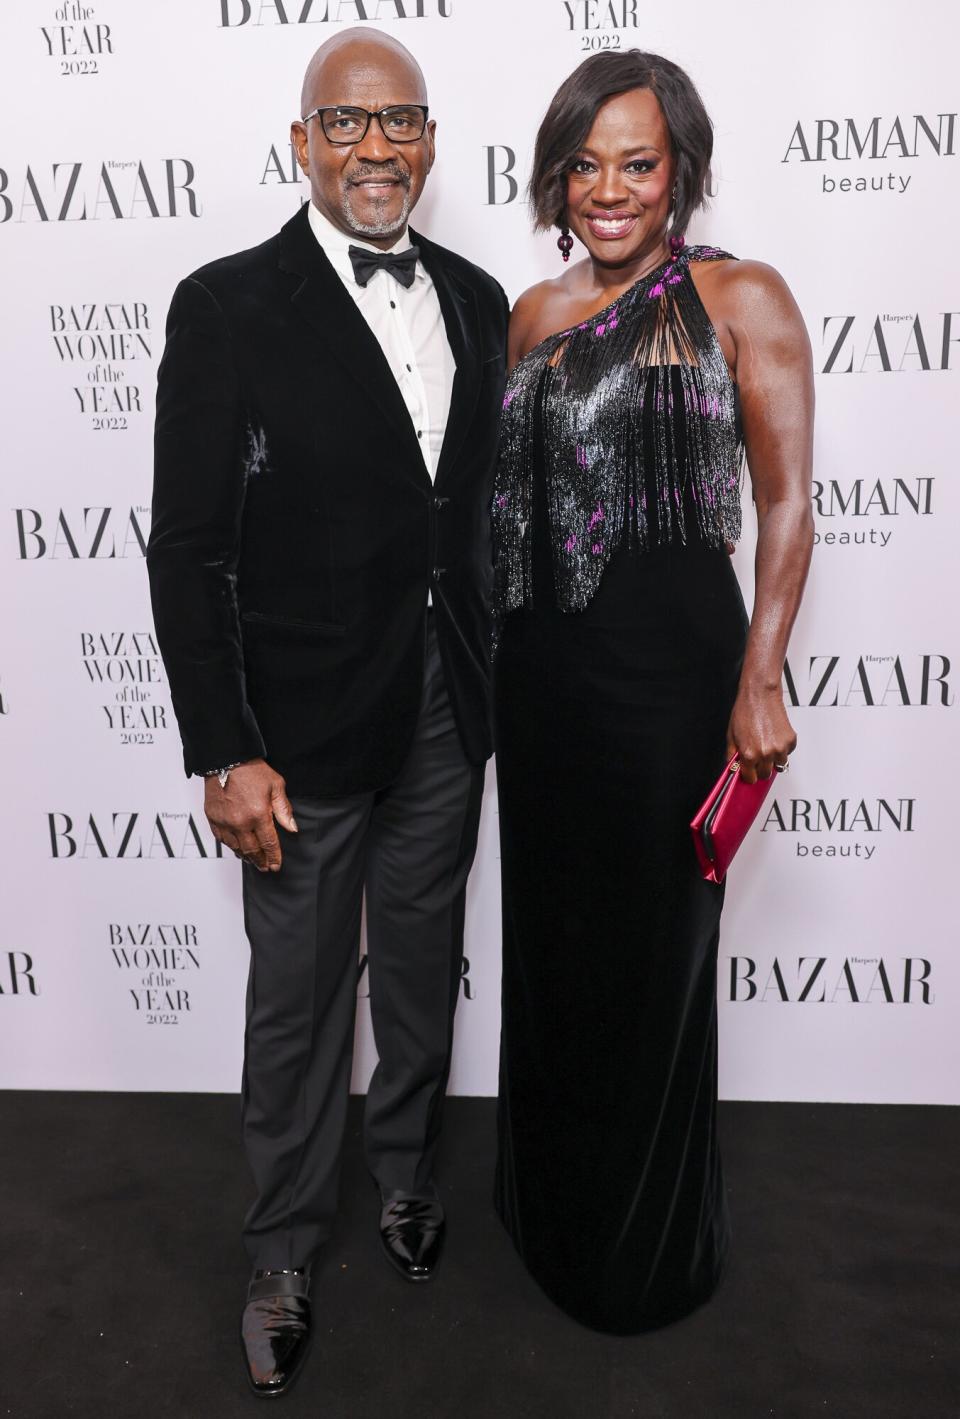 Julius Tennon and Viola Davis attend the Harper's Bazaar Women of the Year Awards 2022, in partnership with Armani Beauty, at Claridge's Hotel on November 10, 2022 in London, England.